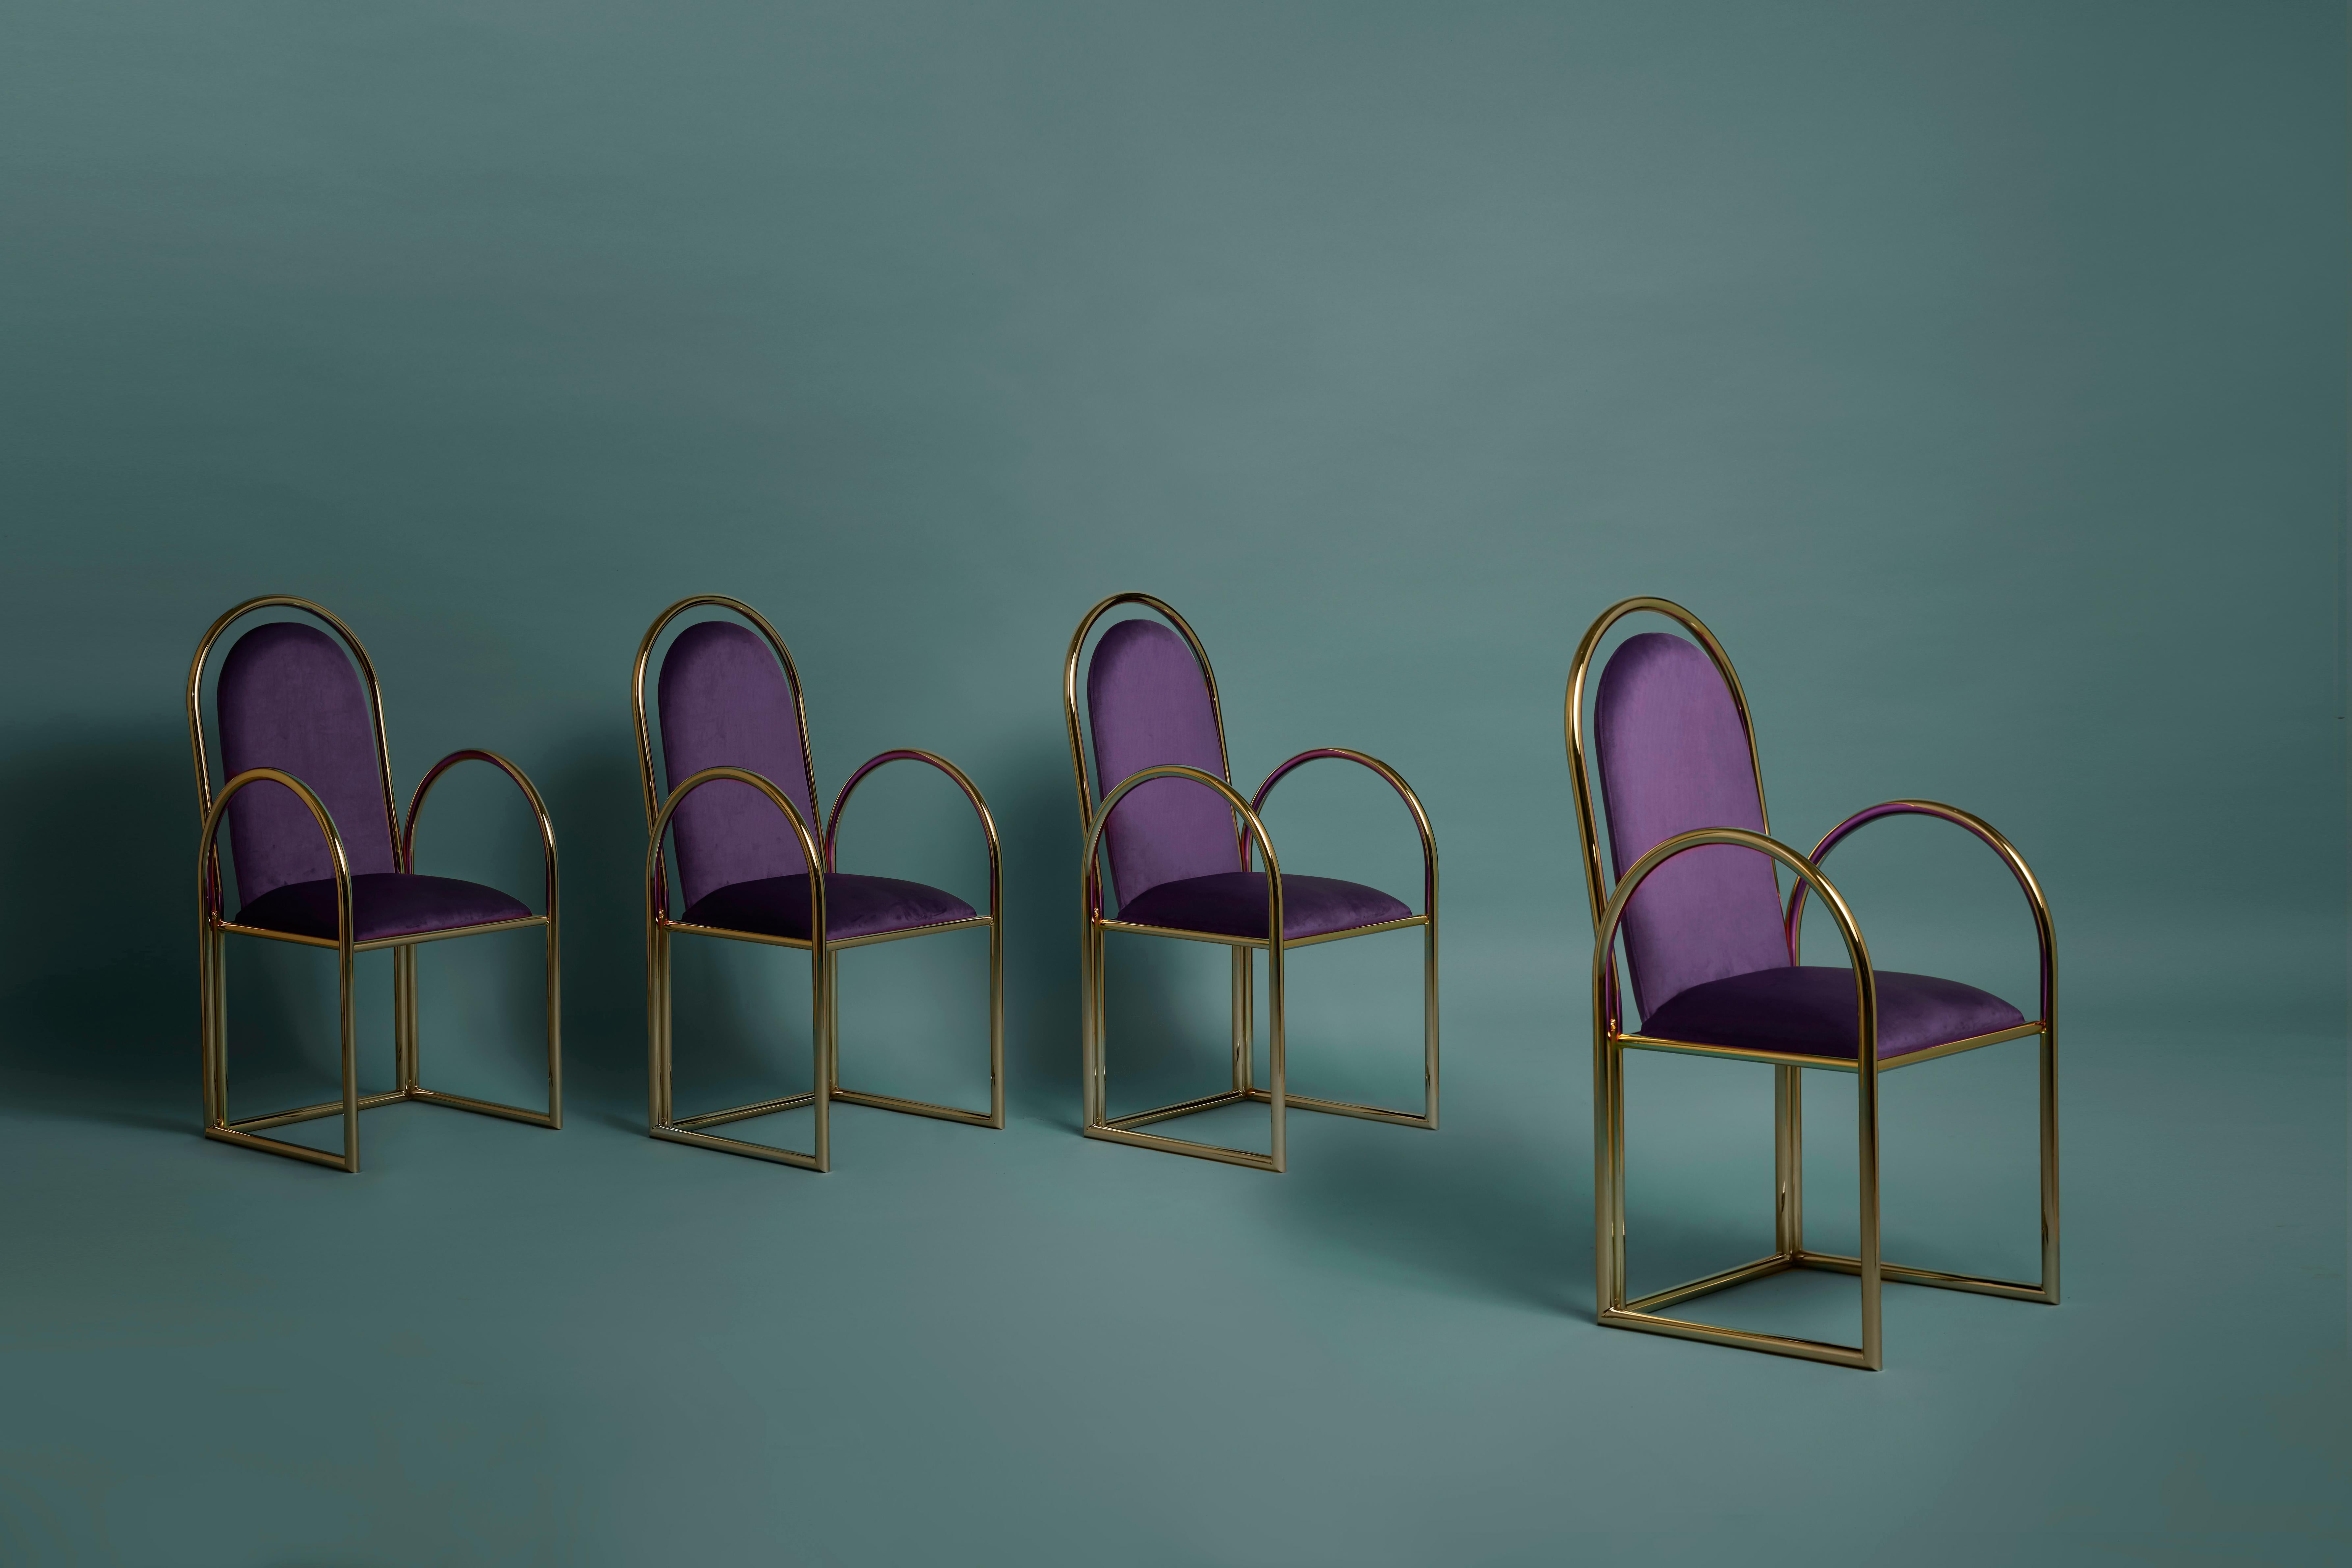 Set of 4 arco chairs by Houtique
Materials: Metallic structure bathed in 24 Ct gold // epoxy paint
 Upholstery velvet
Dimensions: 47 x 45 x H 100 cm
 Seat height: 46 cm

Chairs, tables and stools with fun shapes inspired in the